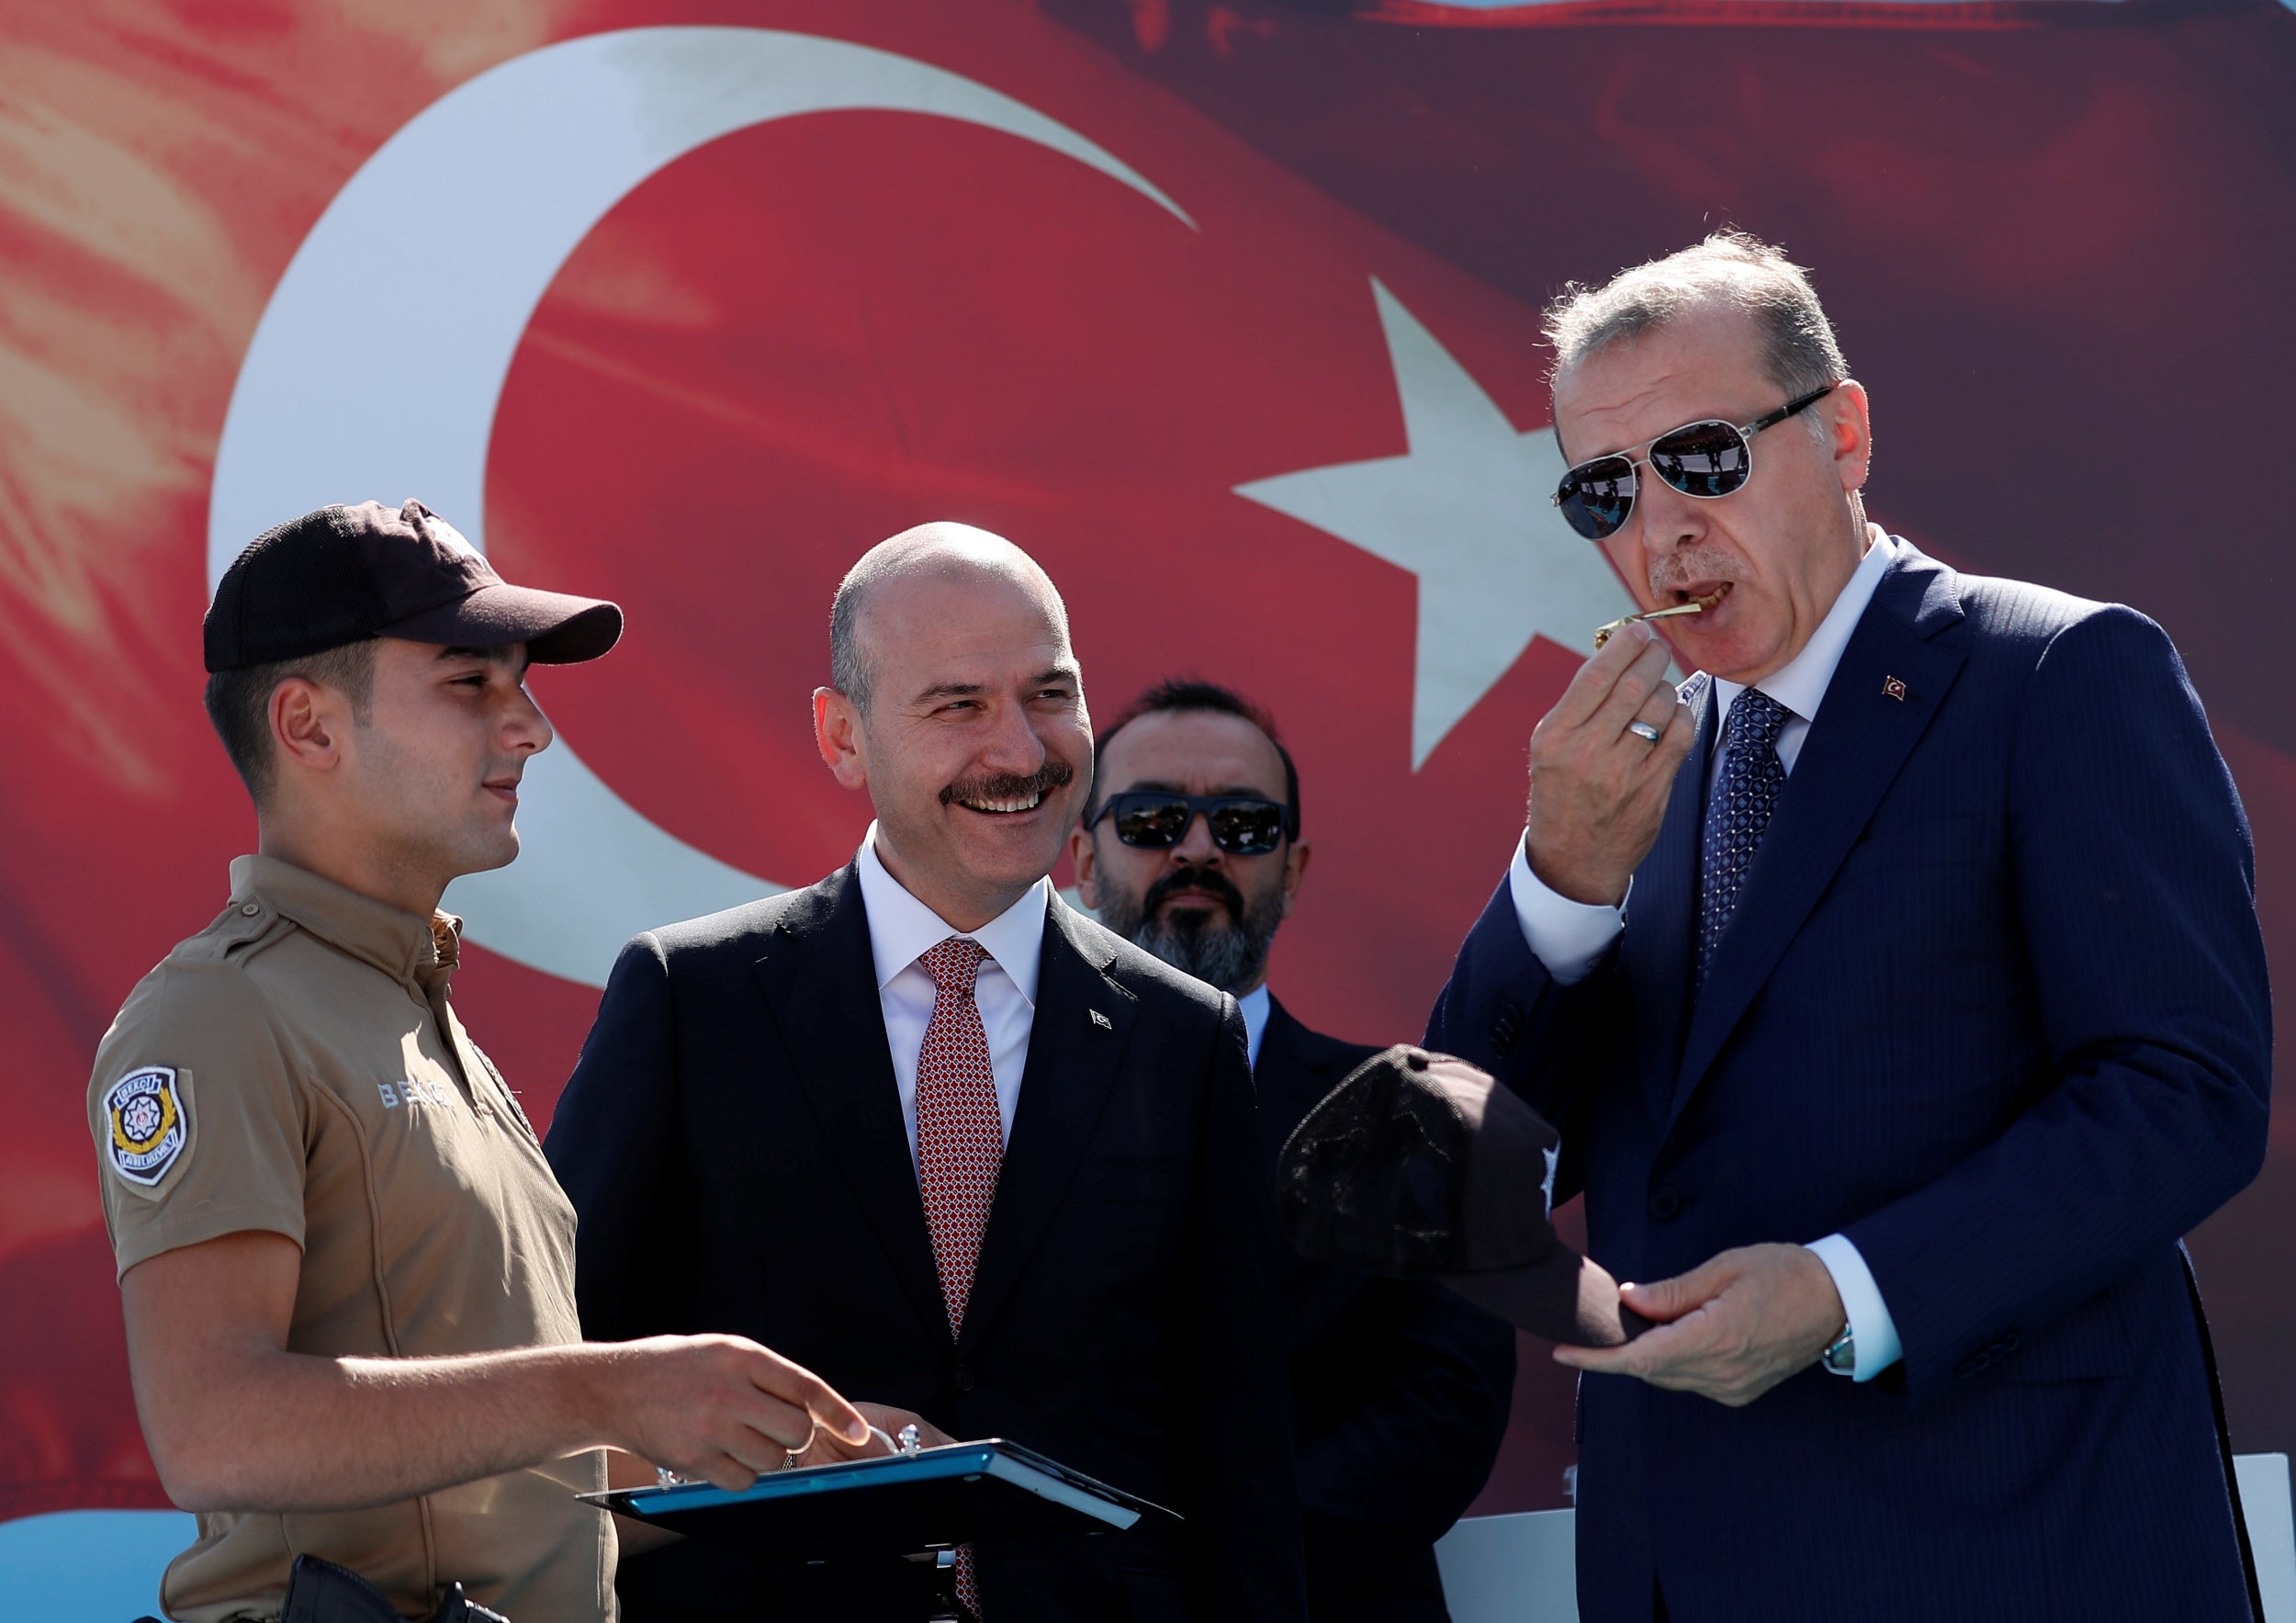 Turkish president Tayyip Erdogan, accompanied by interior minister Suleyman Soylu, blows a watchmen whistle during a ceremony in Istanbul (Reuters)